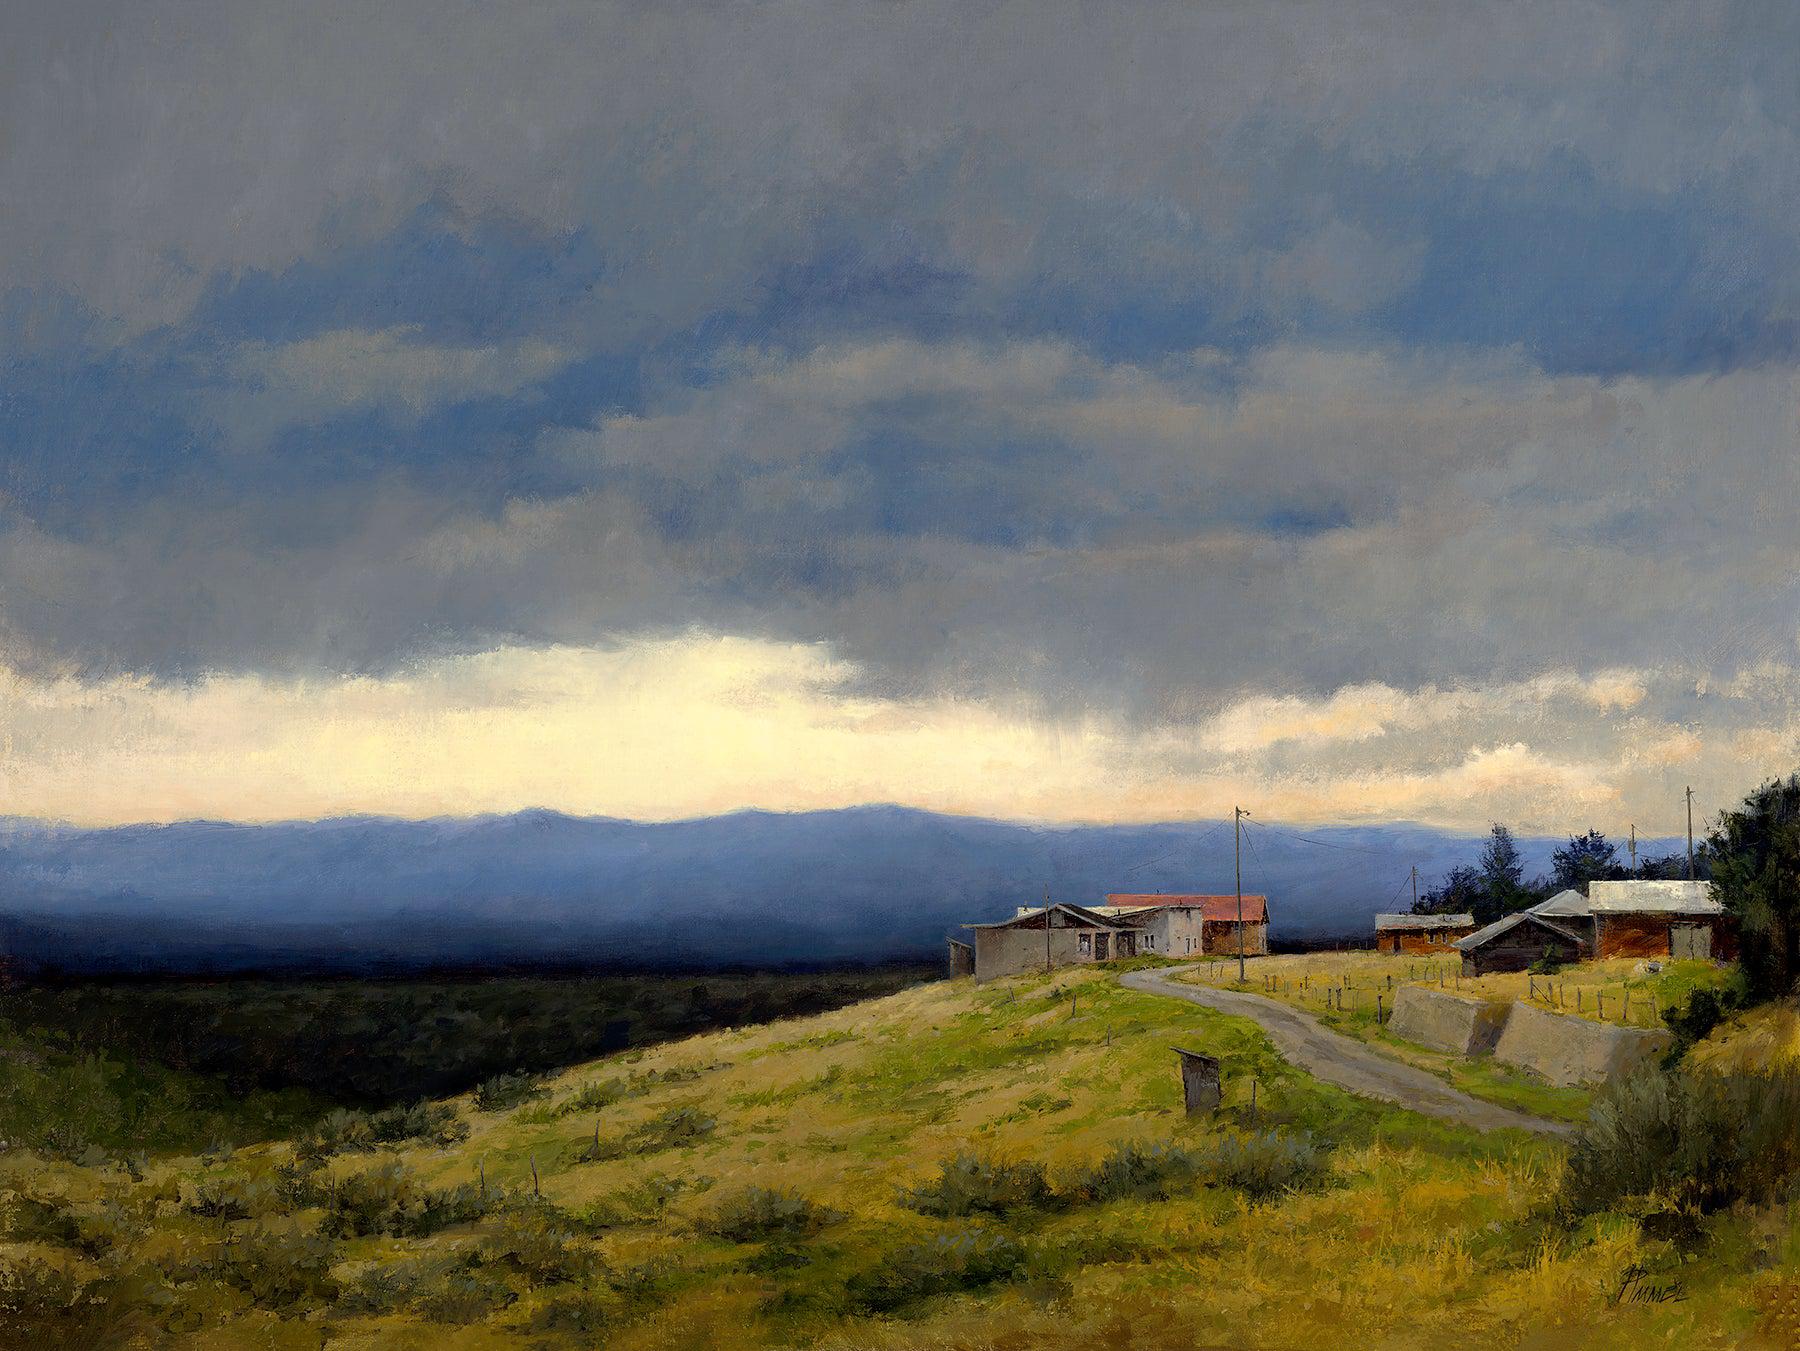 Storm Over Truchas-Painting-Peggy Immel-Sorrel Sky Gallery